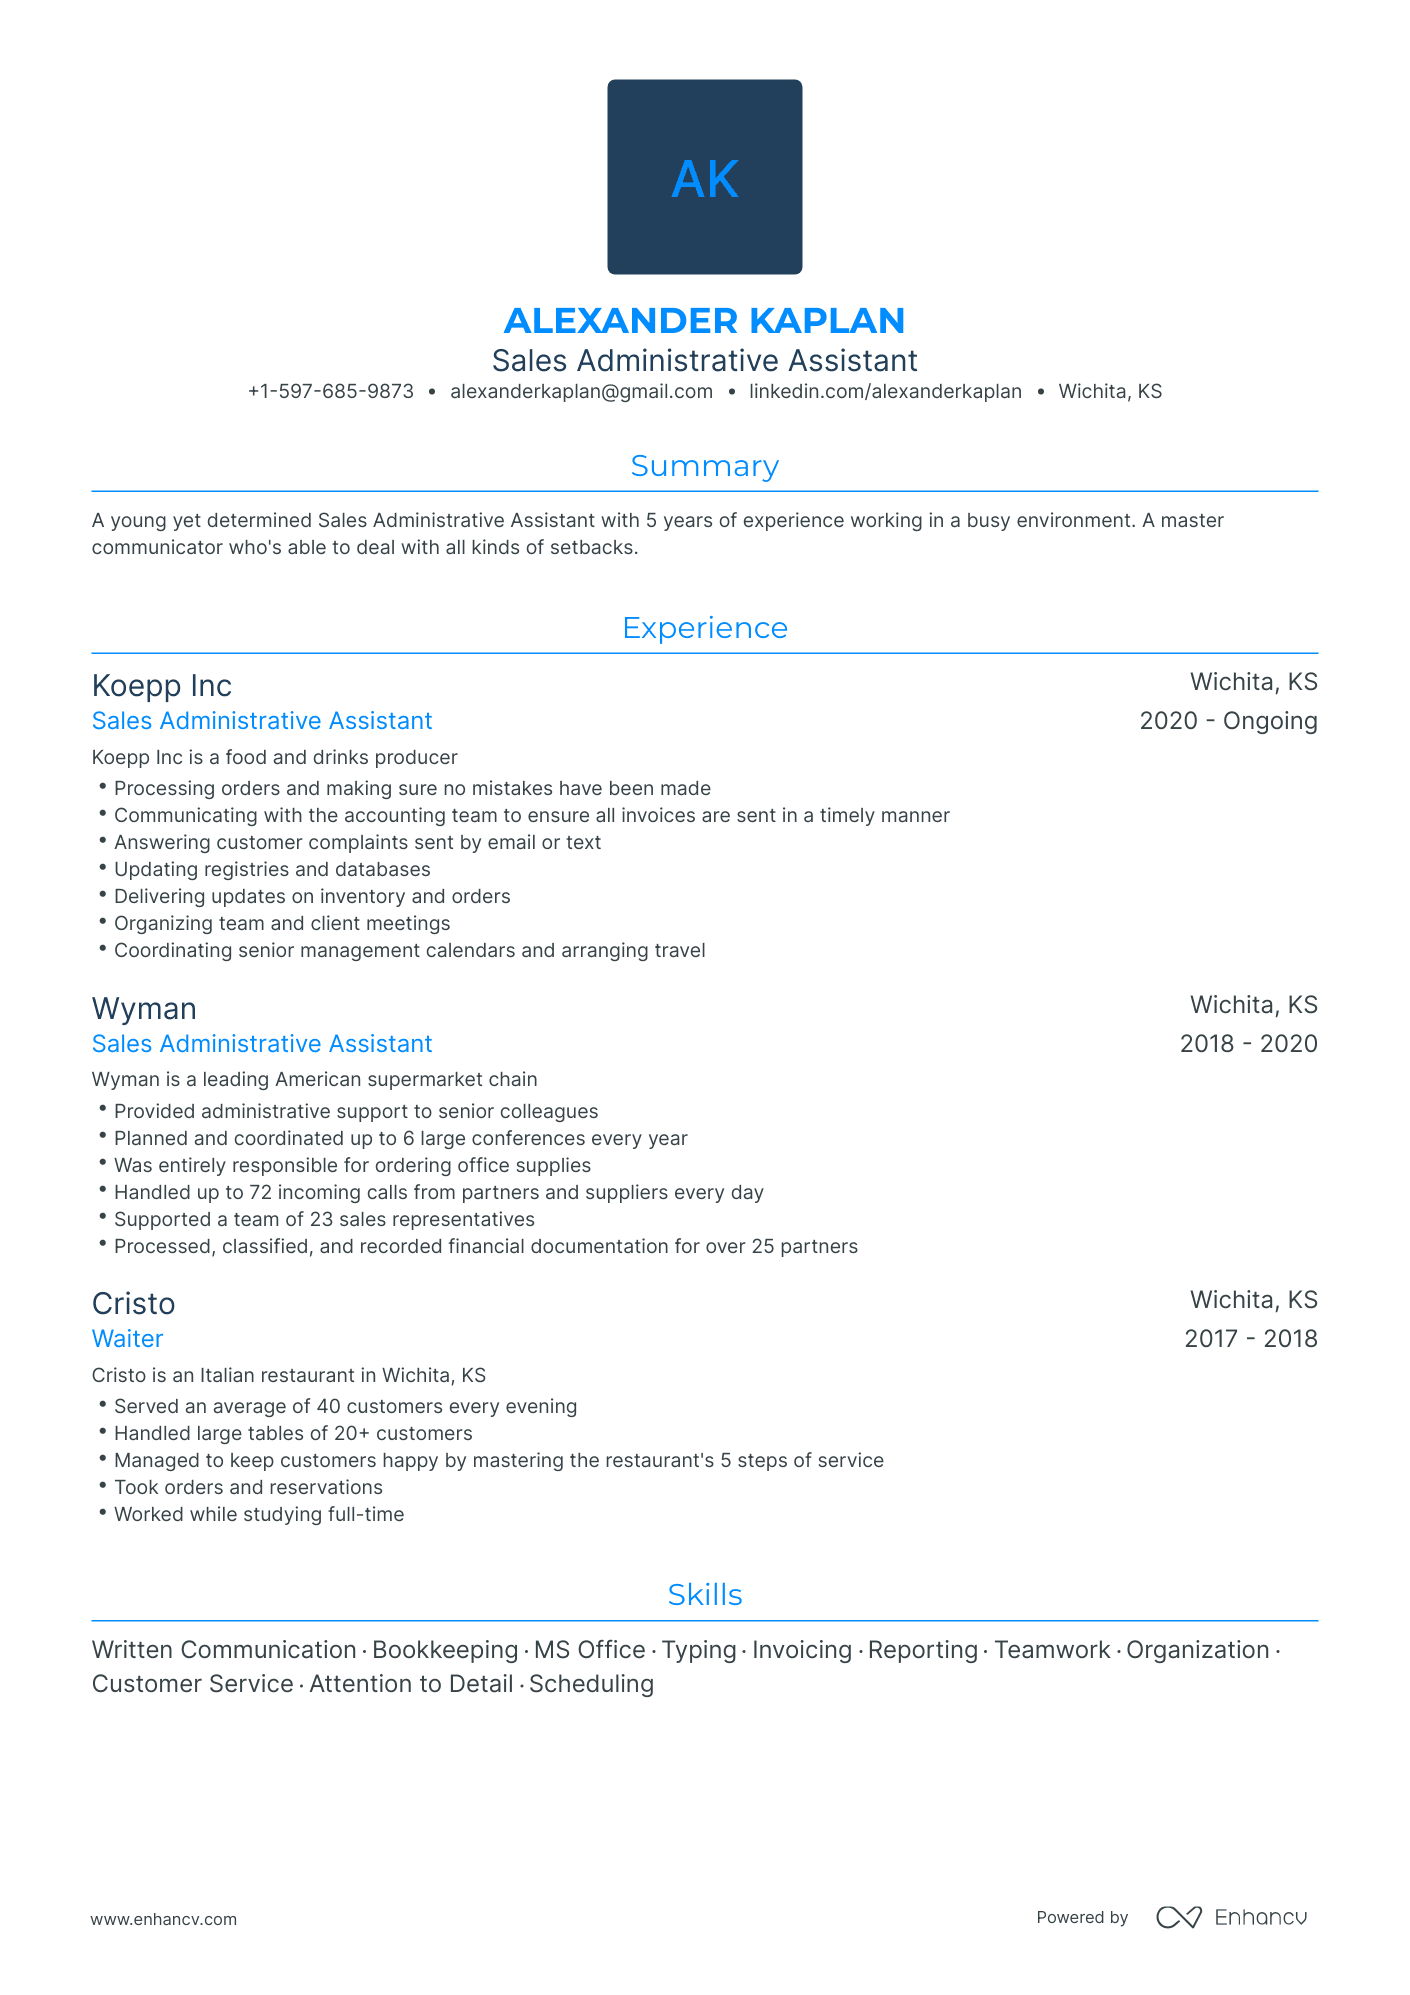 Traditional Sales Administrative Assistant Resume Template